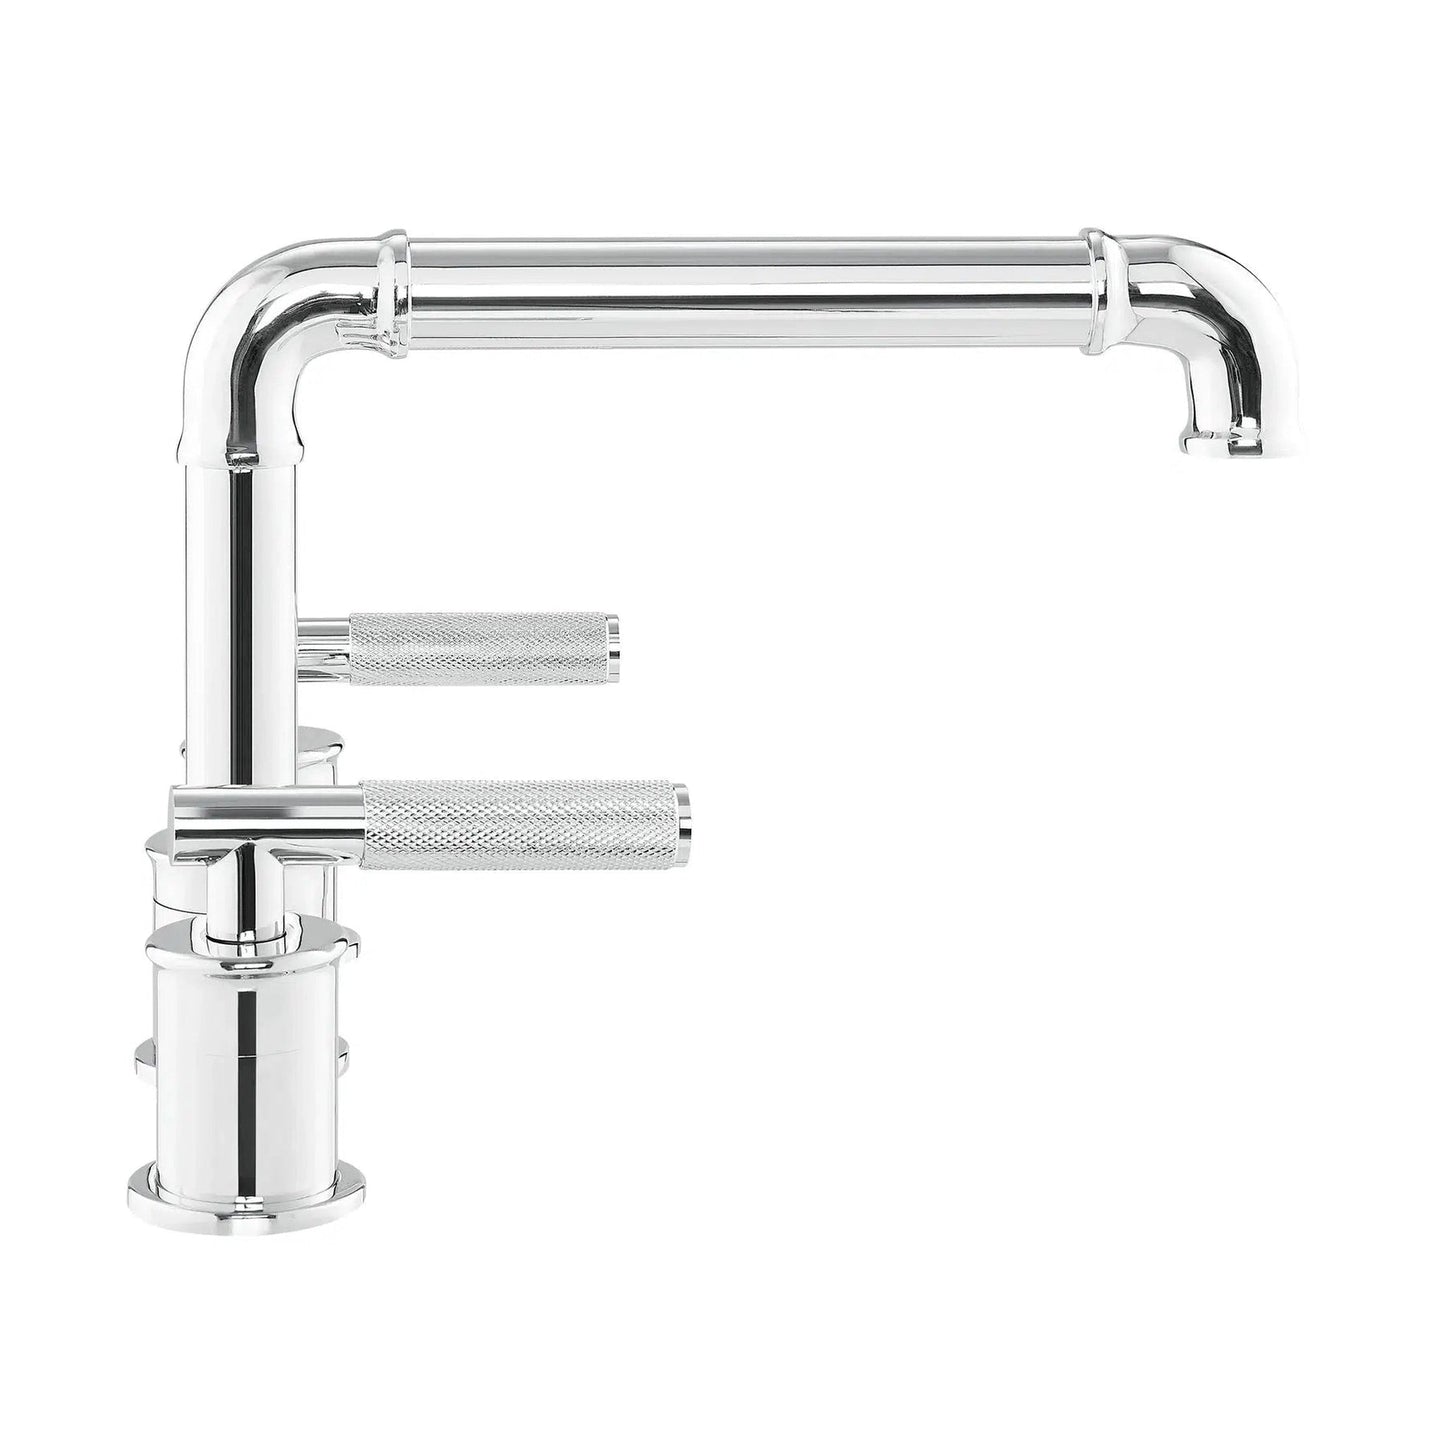 Swiss Madison Avallon 8" Widespread Chrome With Grip Handle and 1.2 GPM Flow Rate